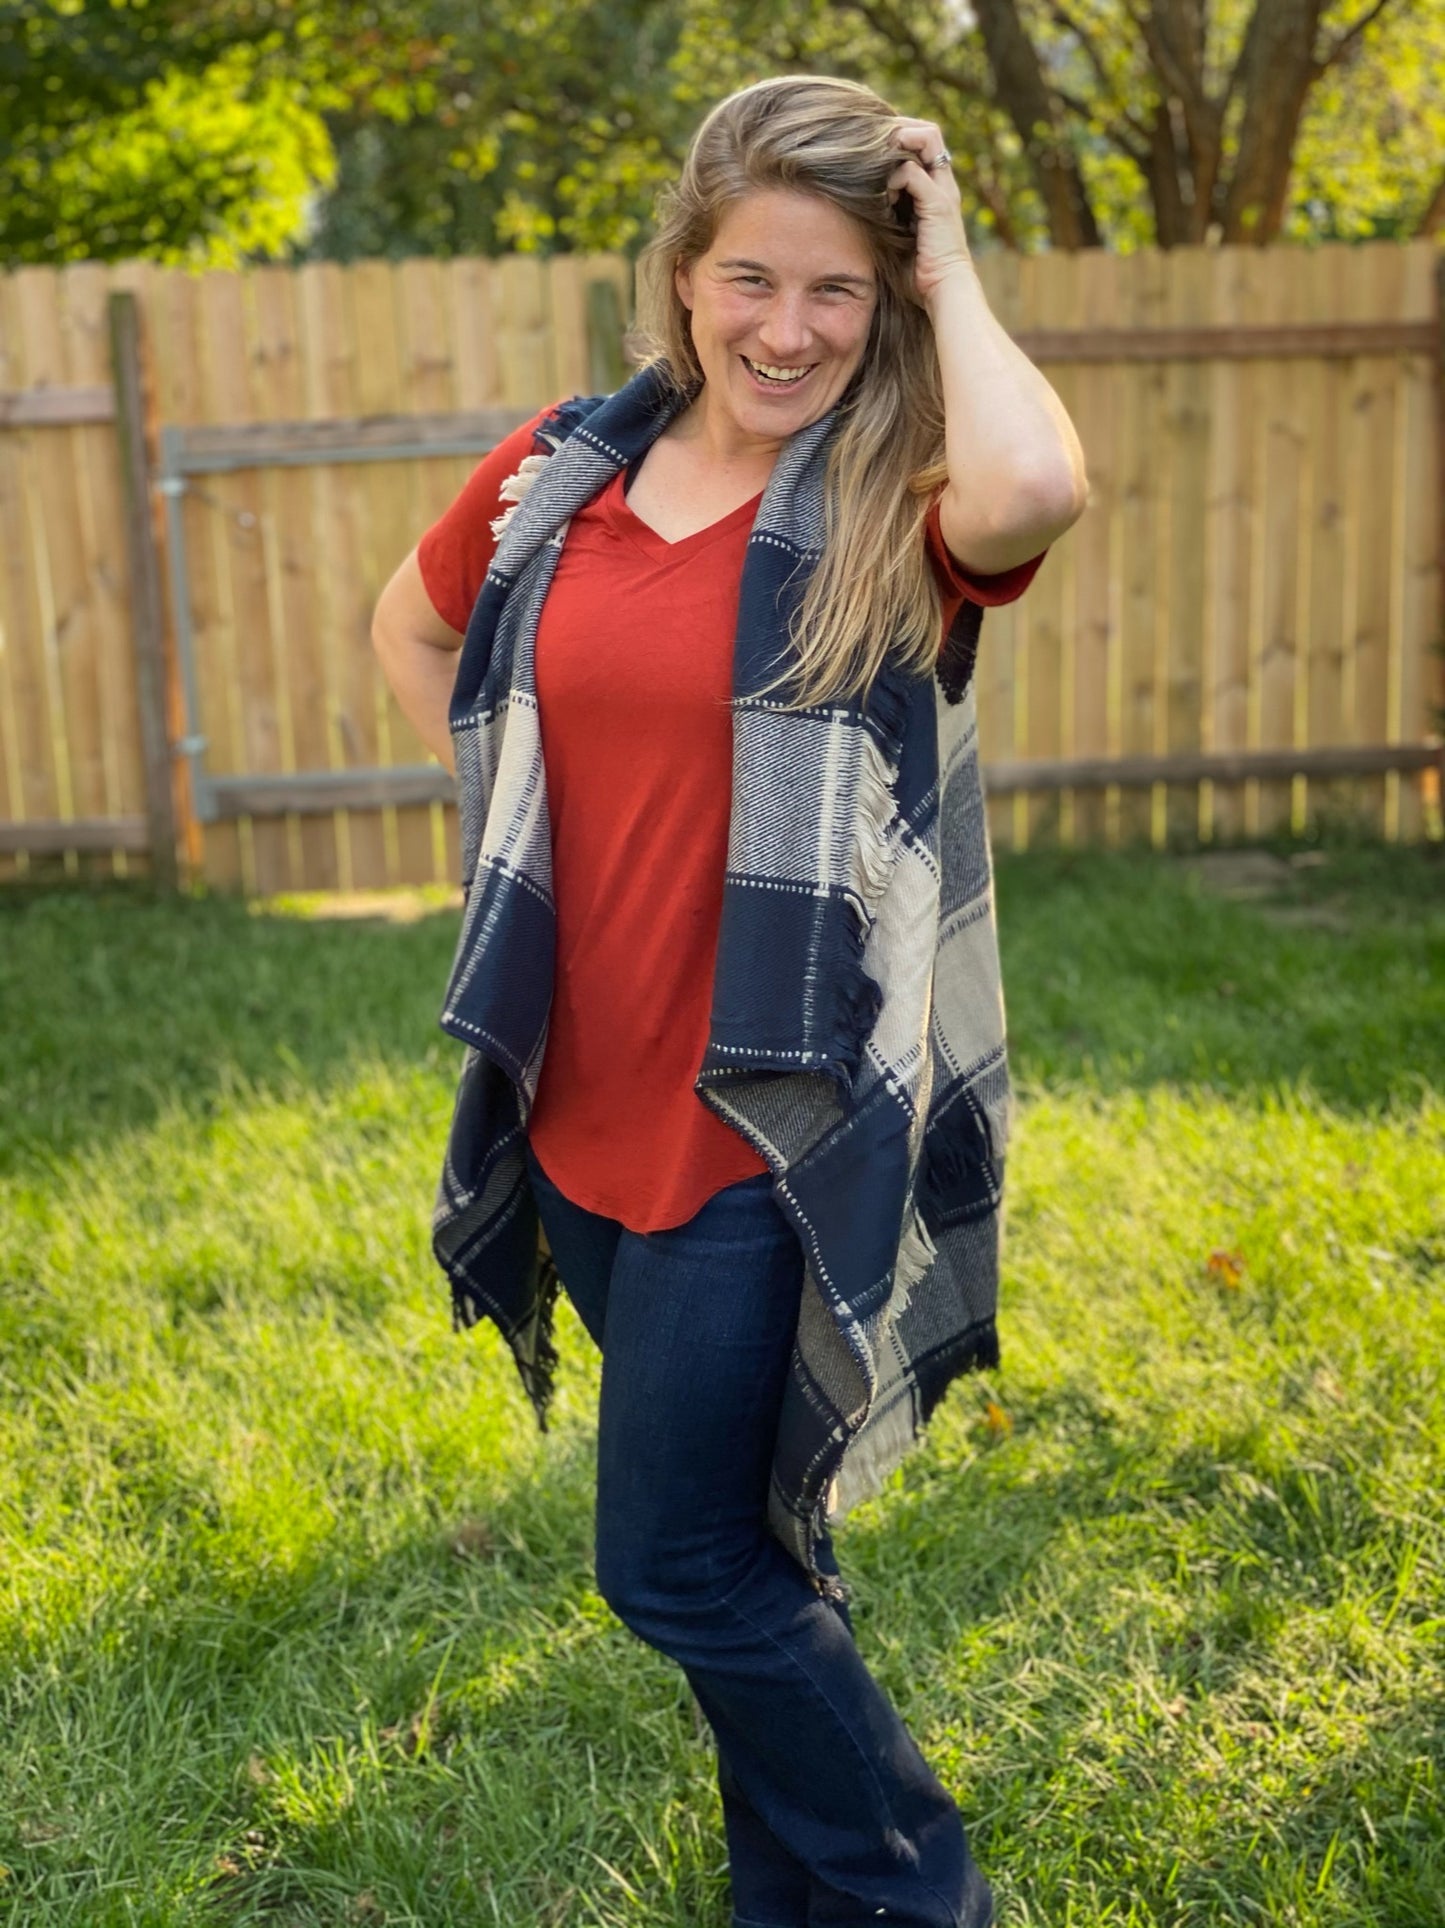 Navy and Gray Plaid Vest